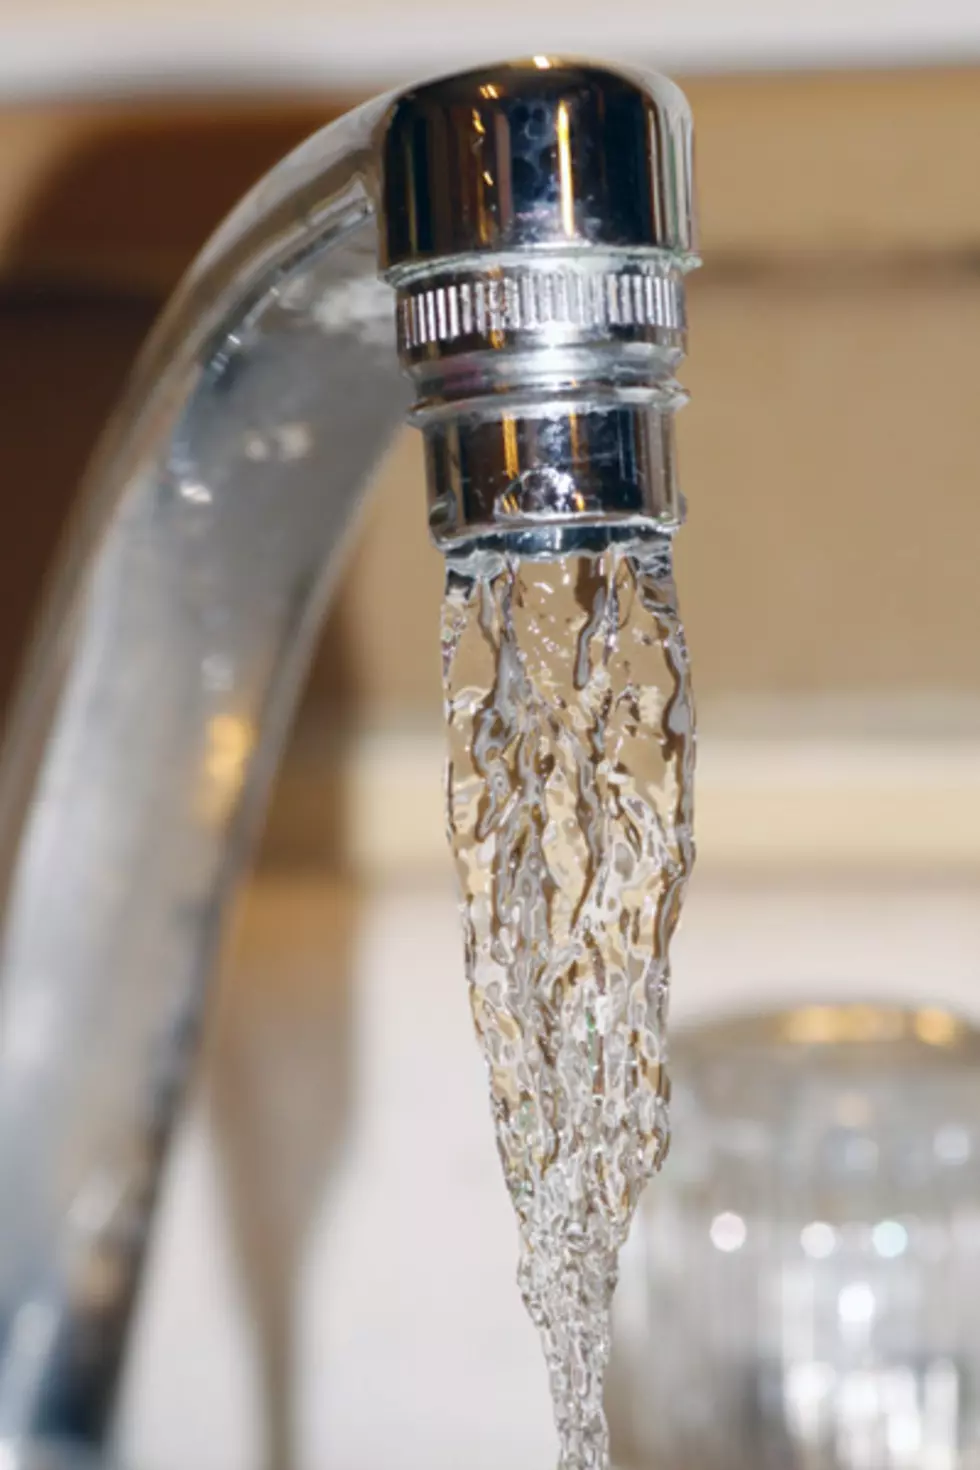 Thousands of Texas Schools’ Water to Be Tested